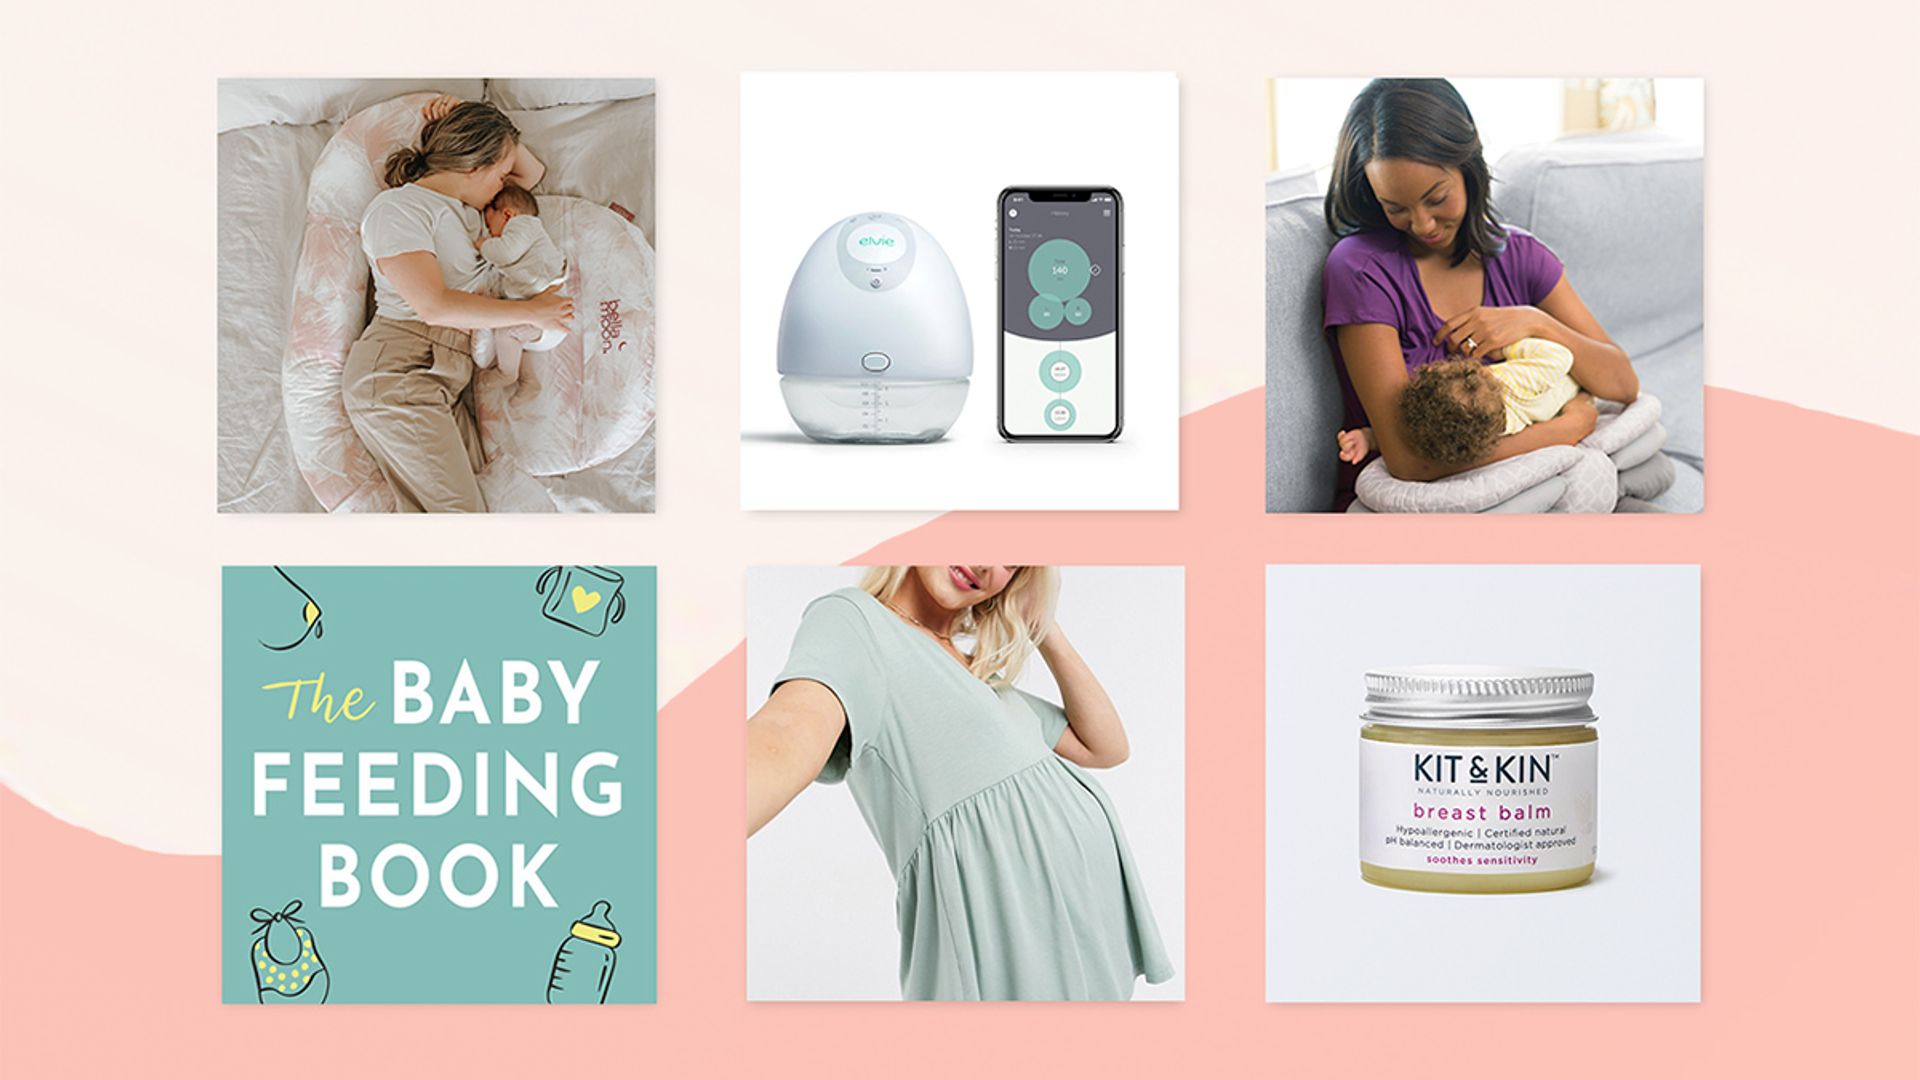 16 essential items to help with breastfeeding for new mums